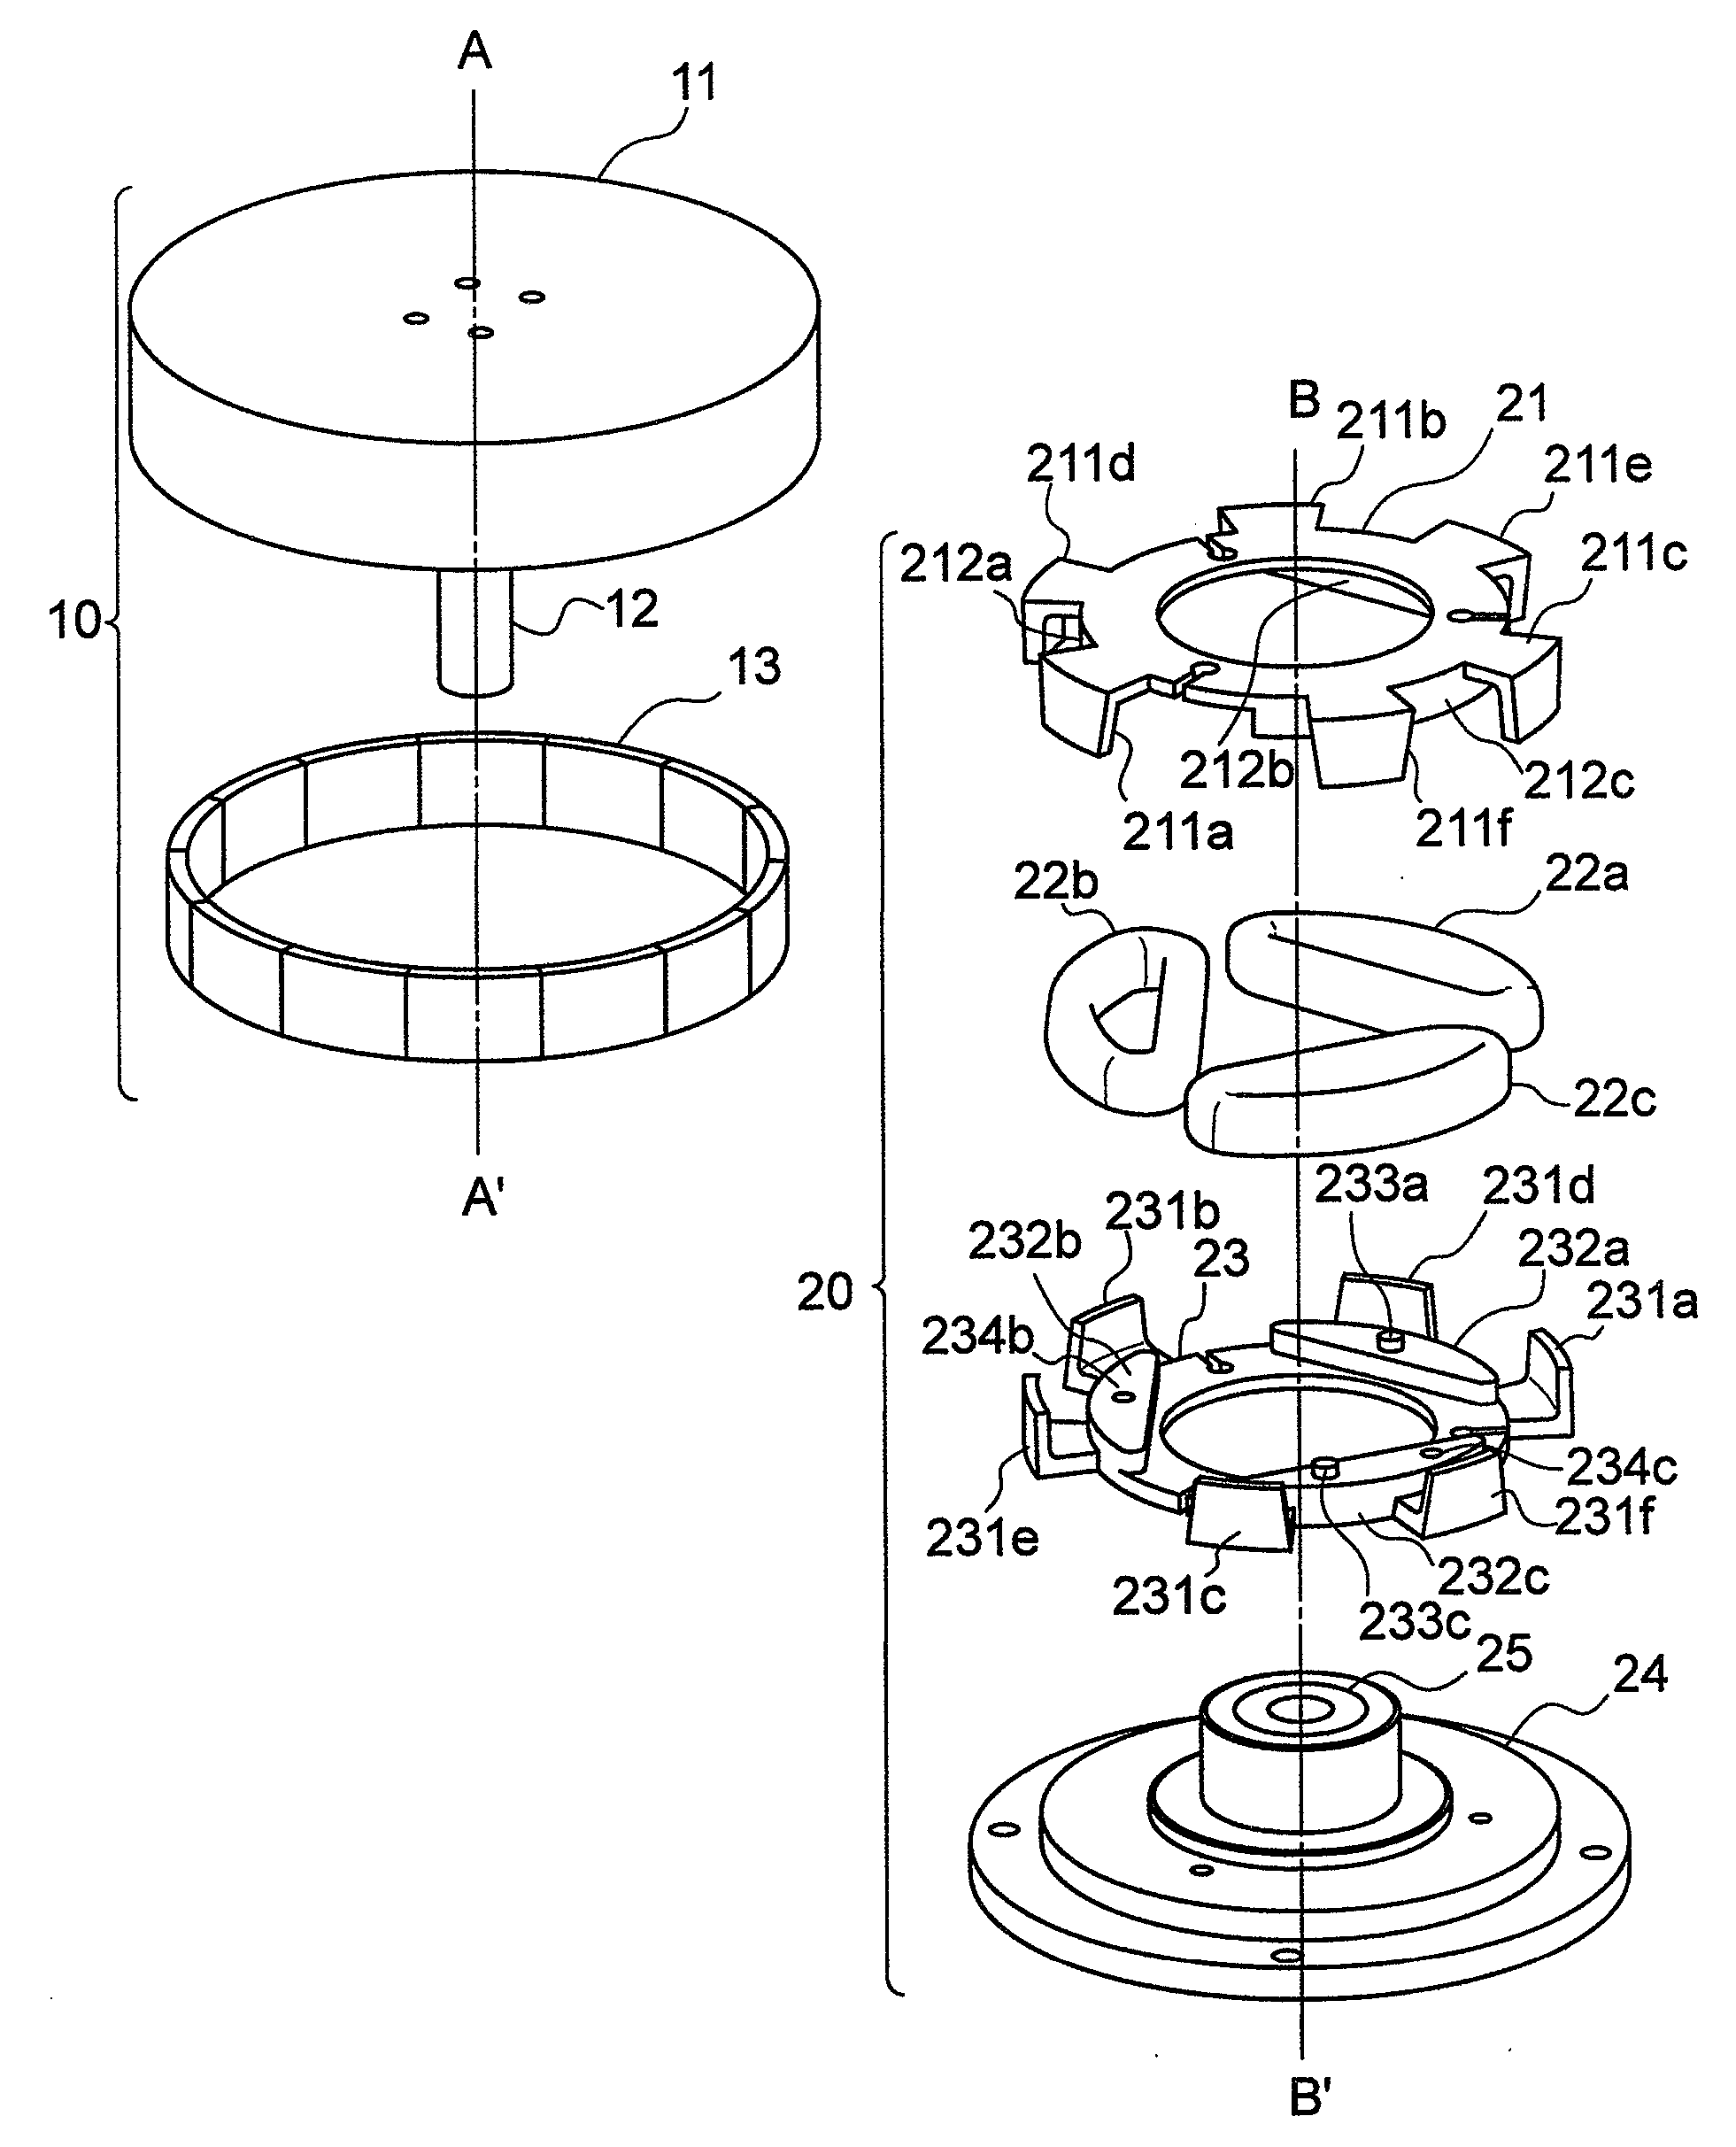 Motor and fan device using the same